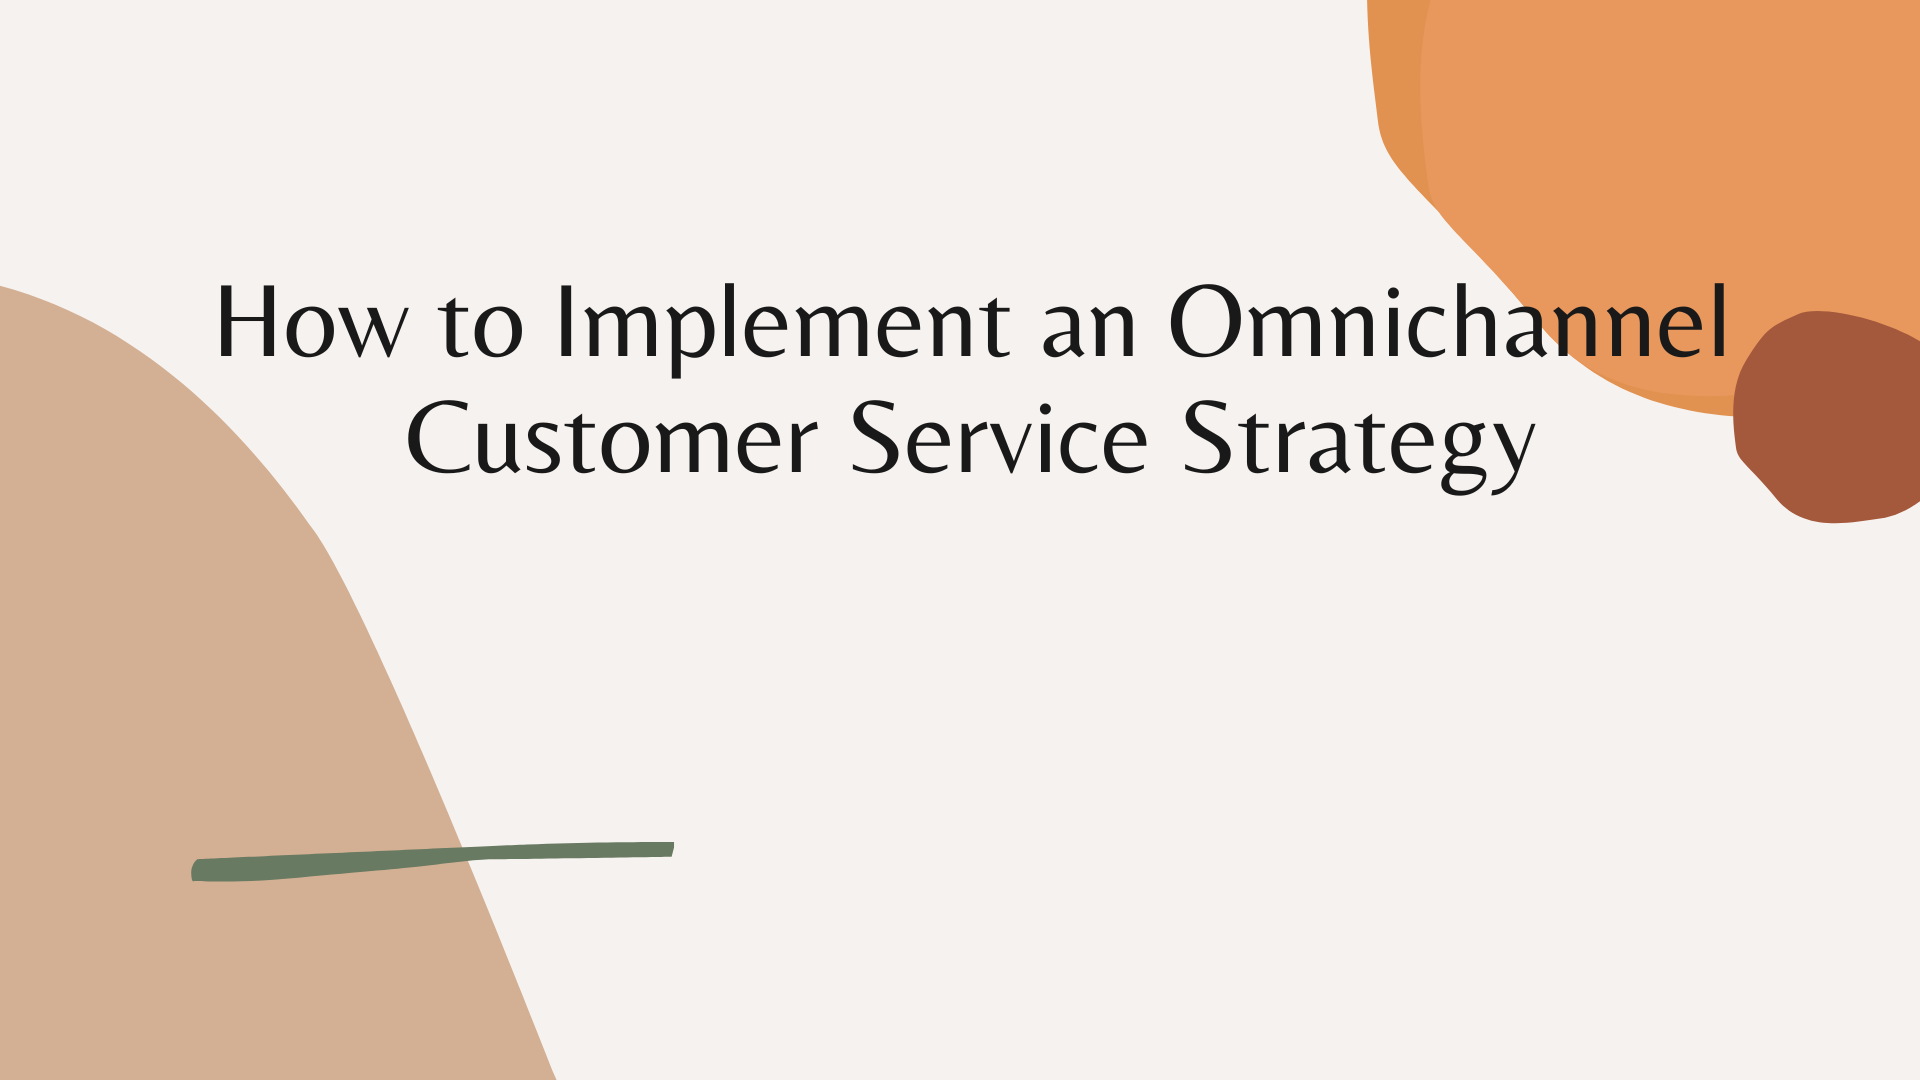 How to Implement an Omnichannel Customer Service Strategy